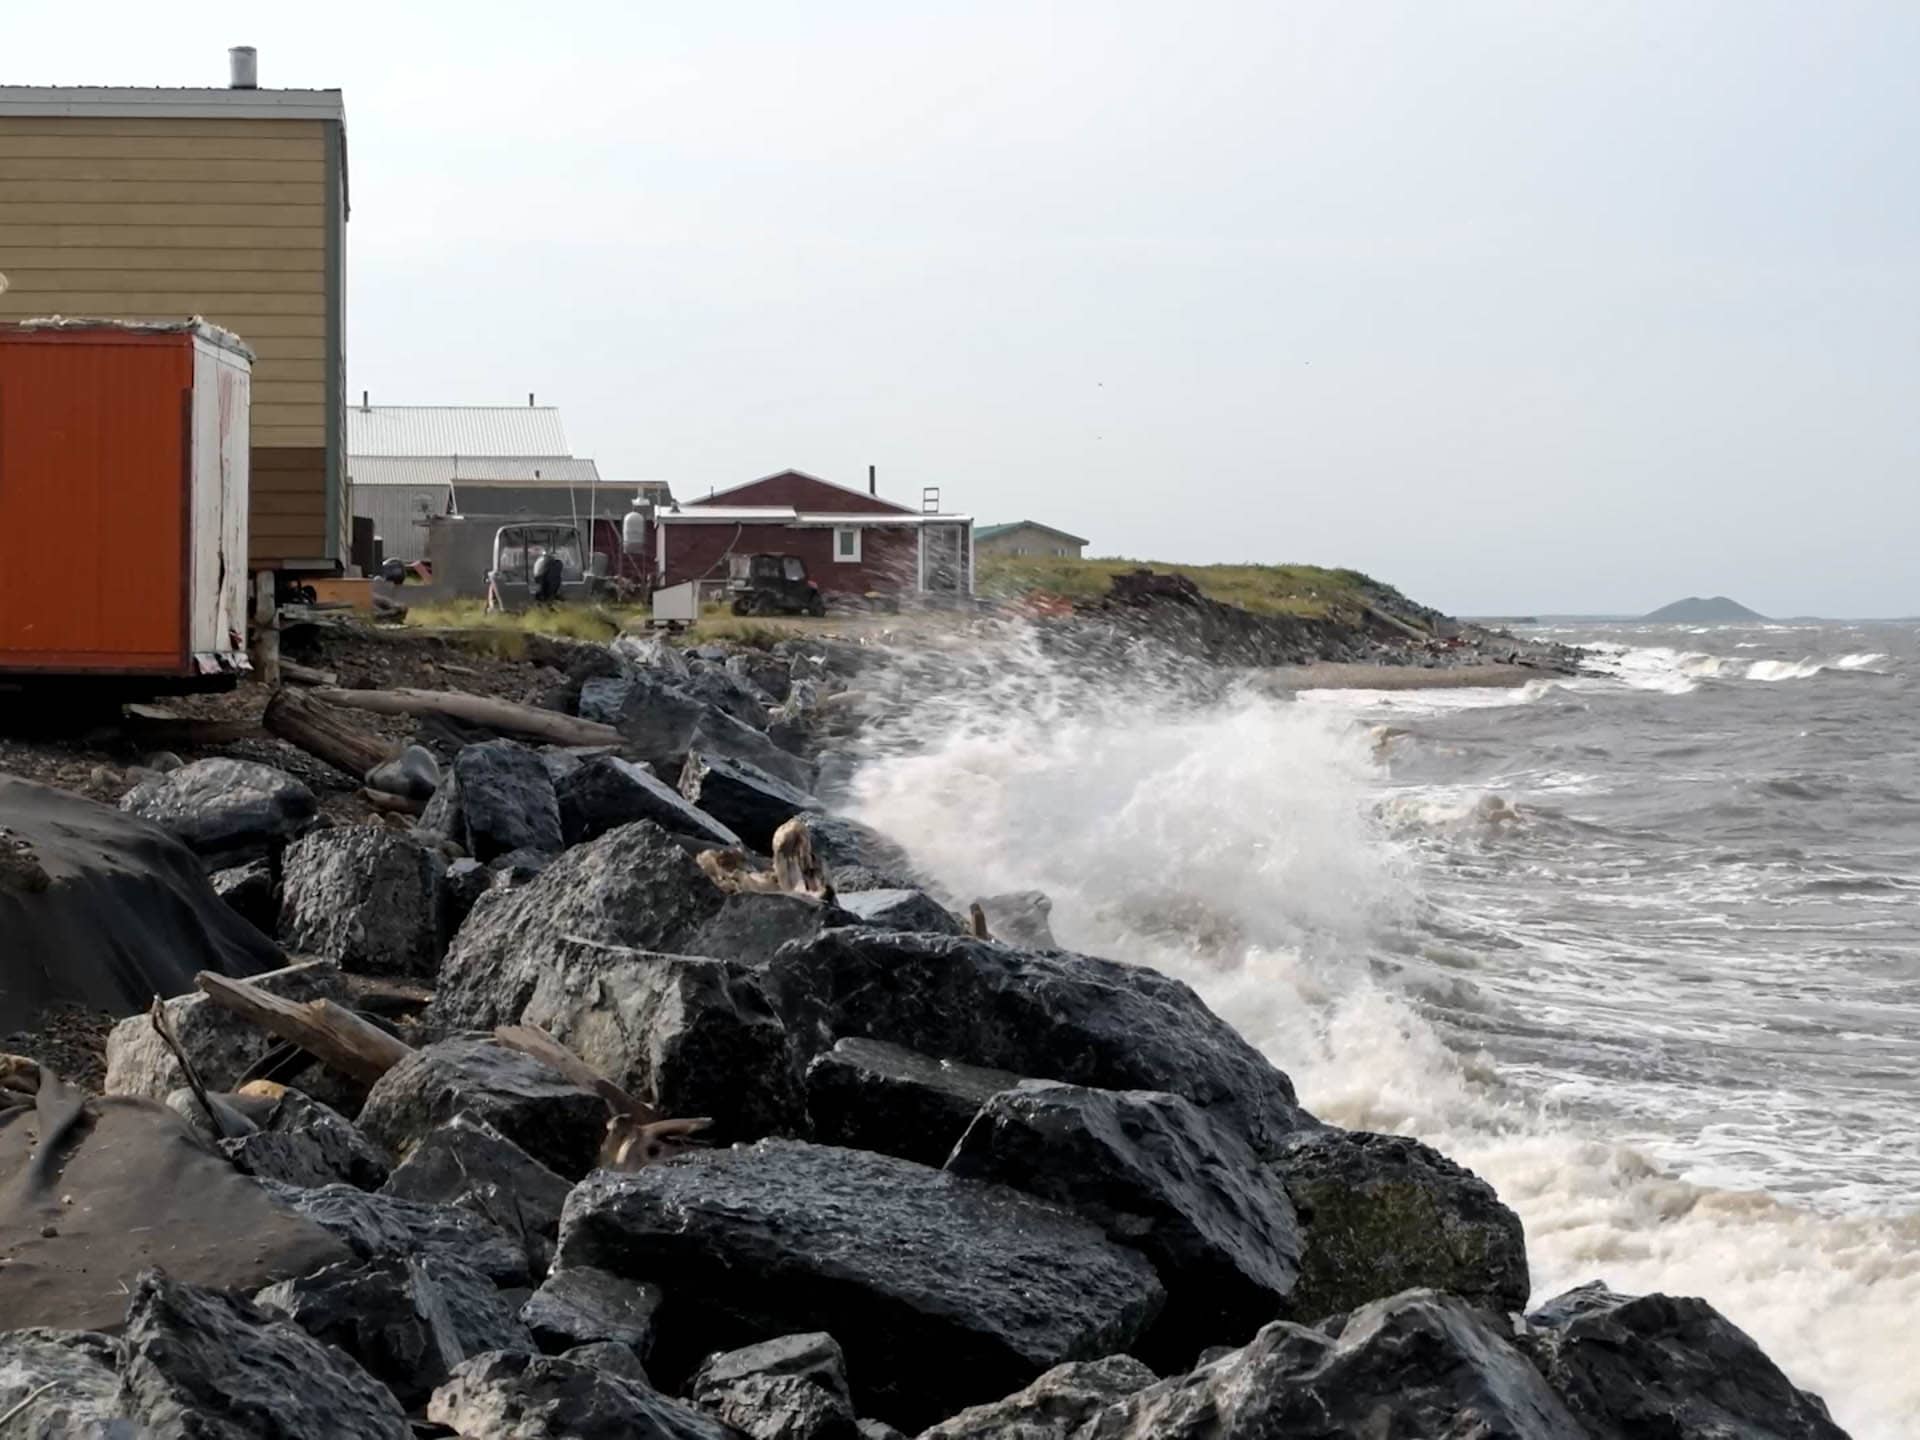 Geofabric, boulders and concrete slabs have failed to protect the shoreline